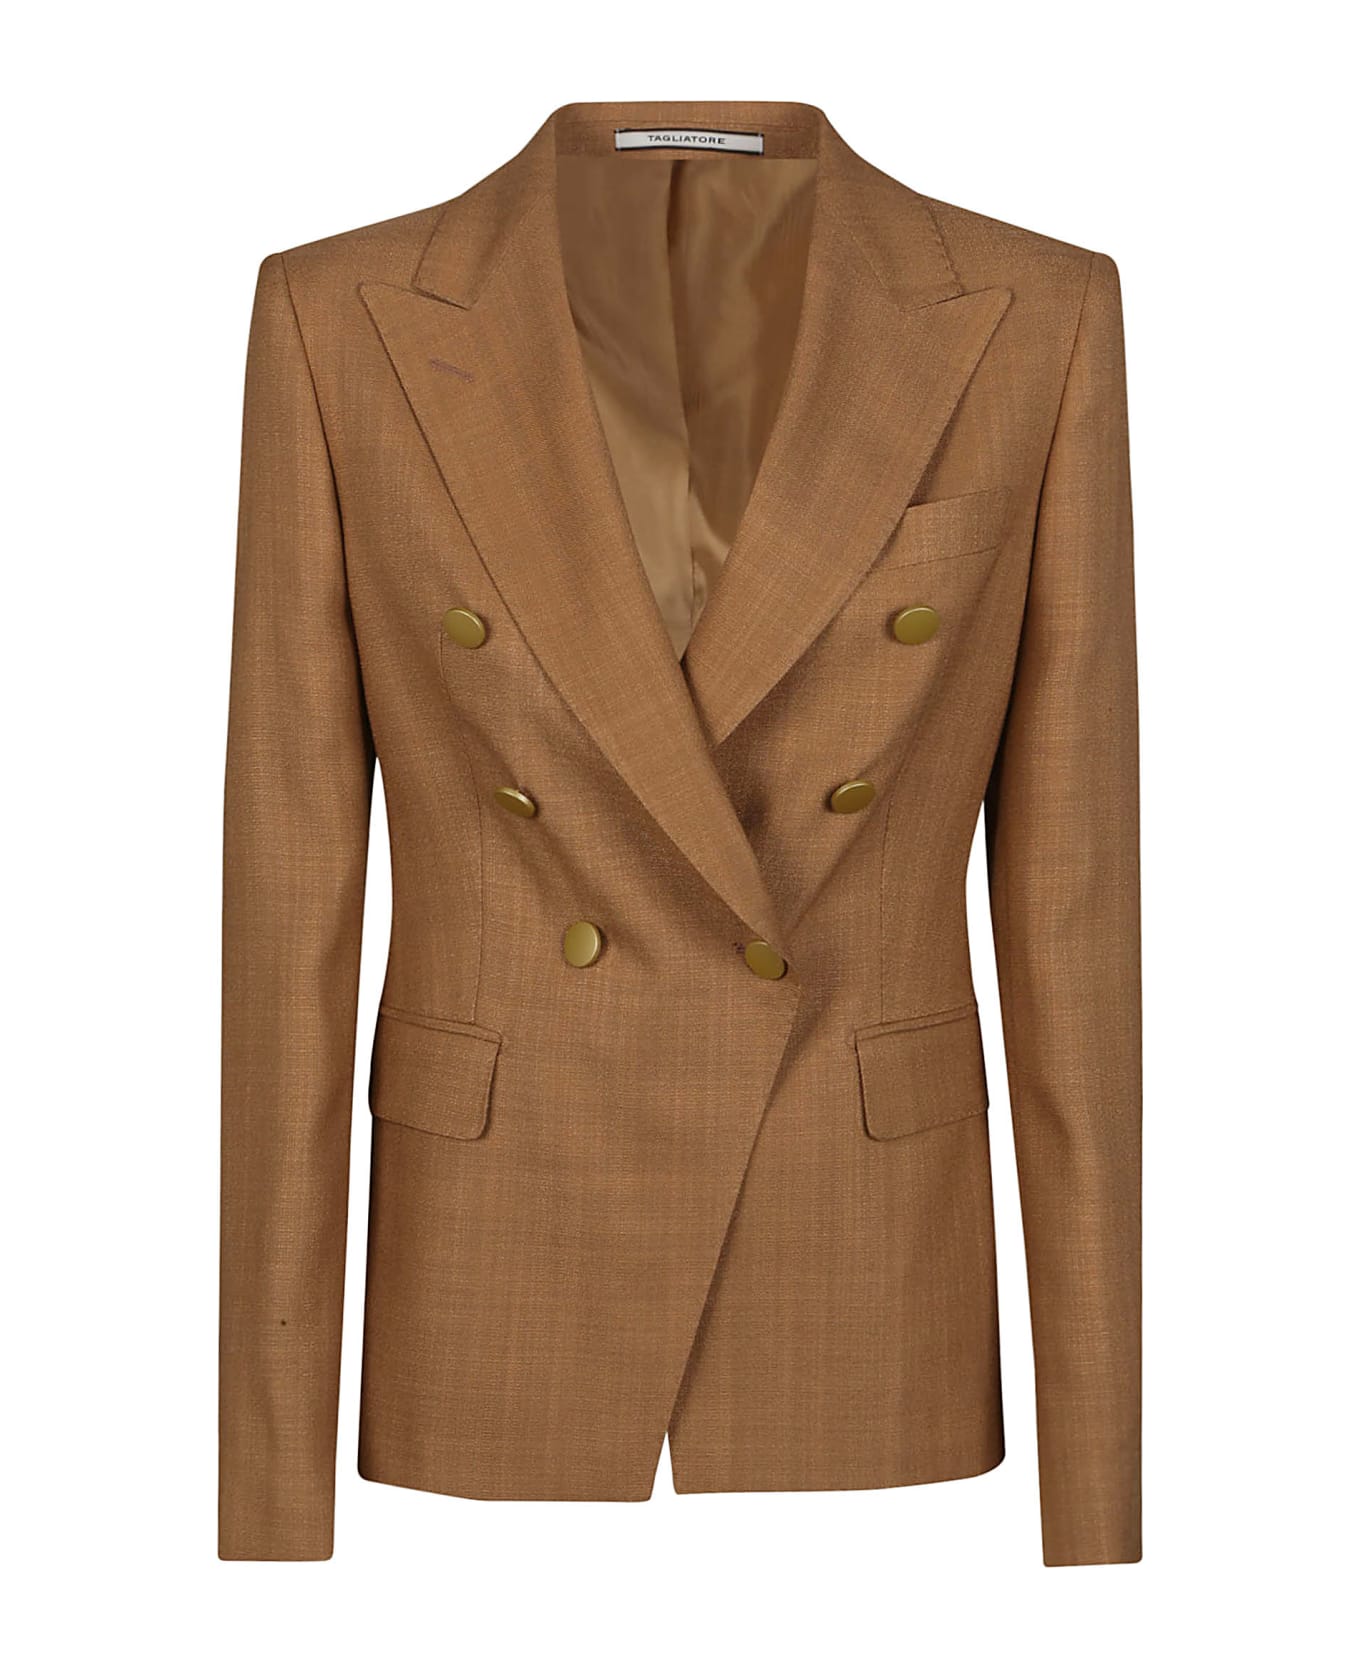 Tagliatore Double Breasted Jacket - Cognac